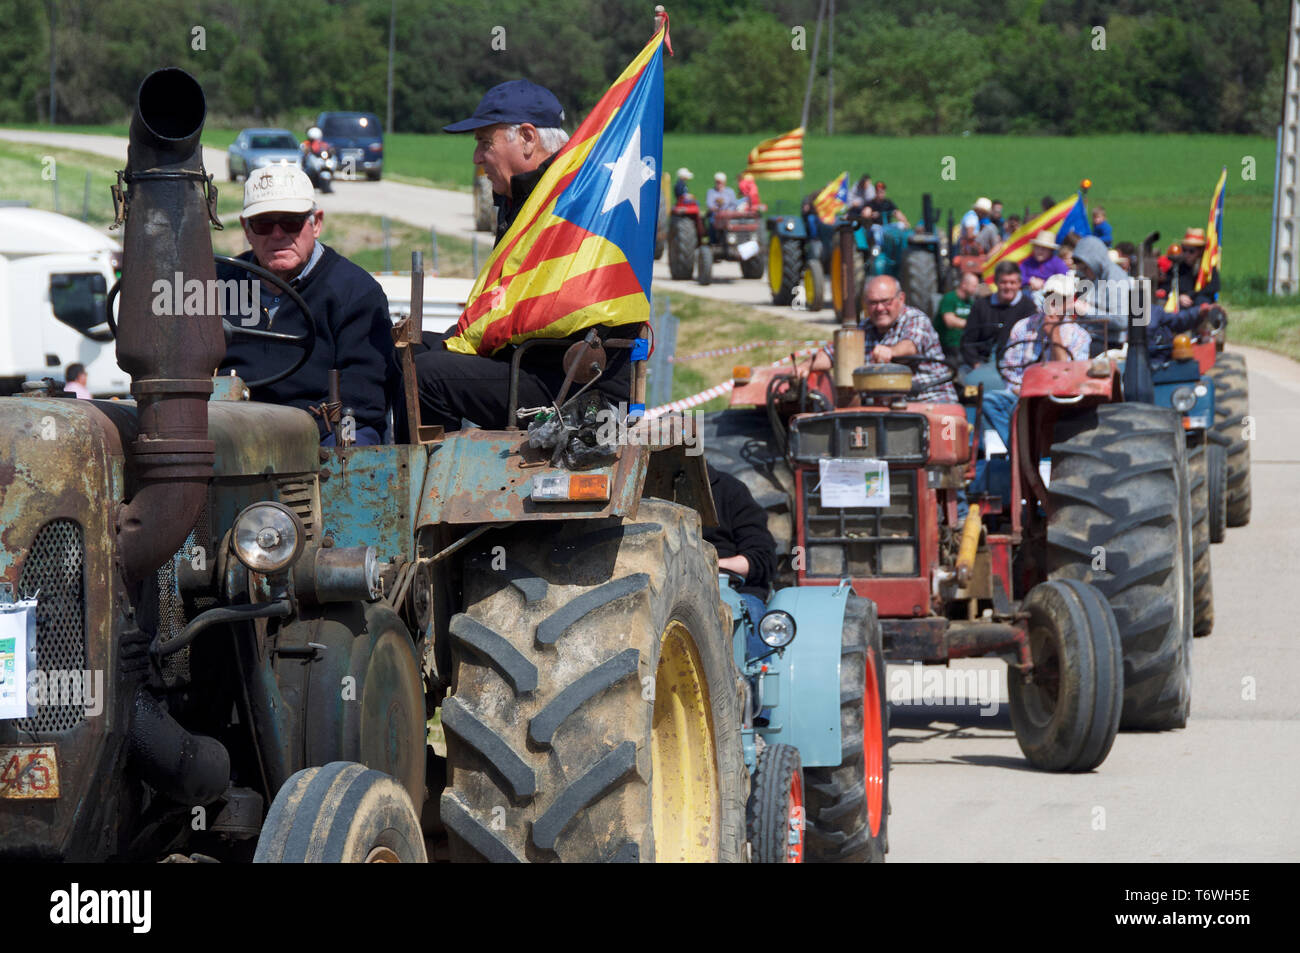 tractor procession at country fair Catalunya Stock Photo